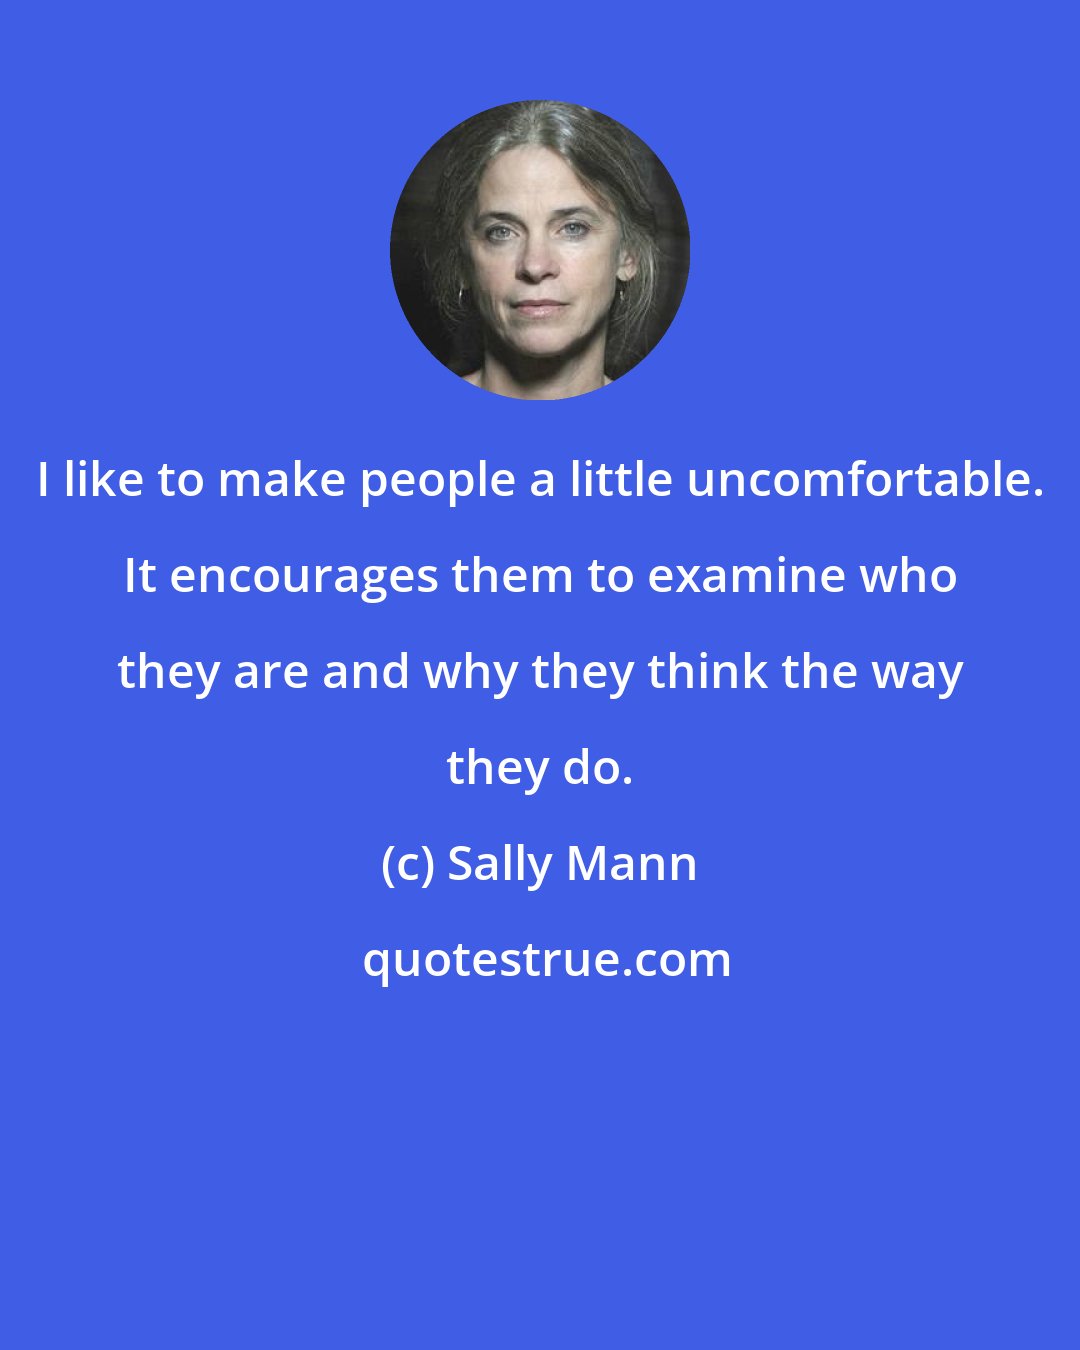 Sally Mann: I like to make people a little uncomfortable. It encourages them to examine who they are and why they think the way they do.